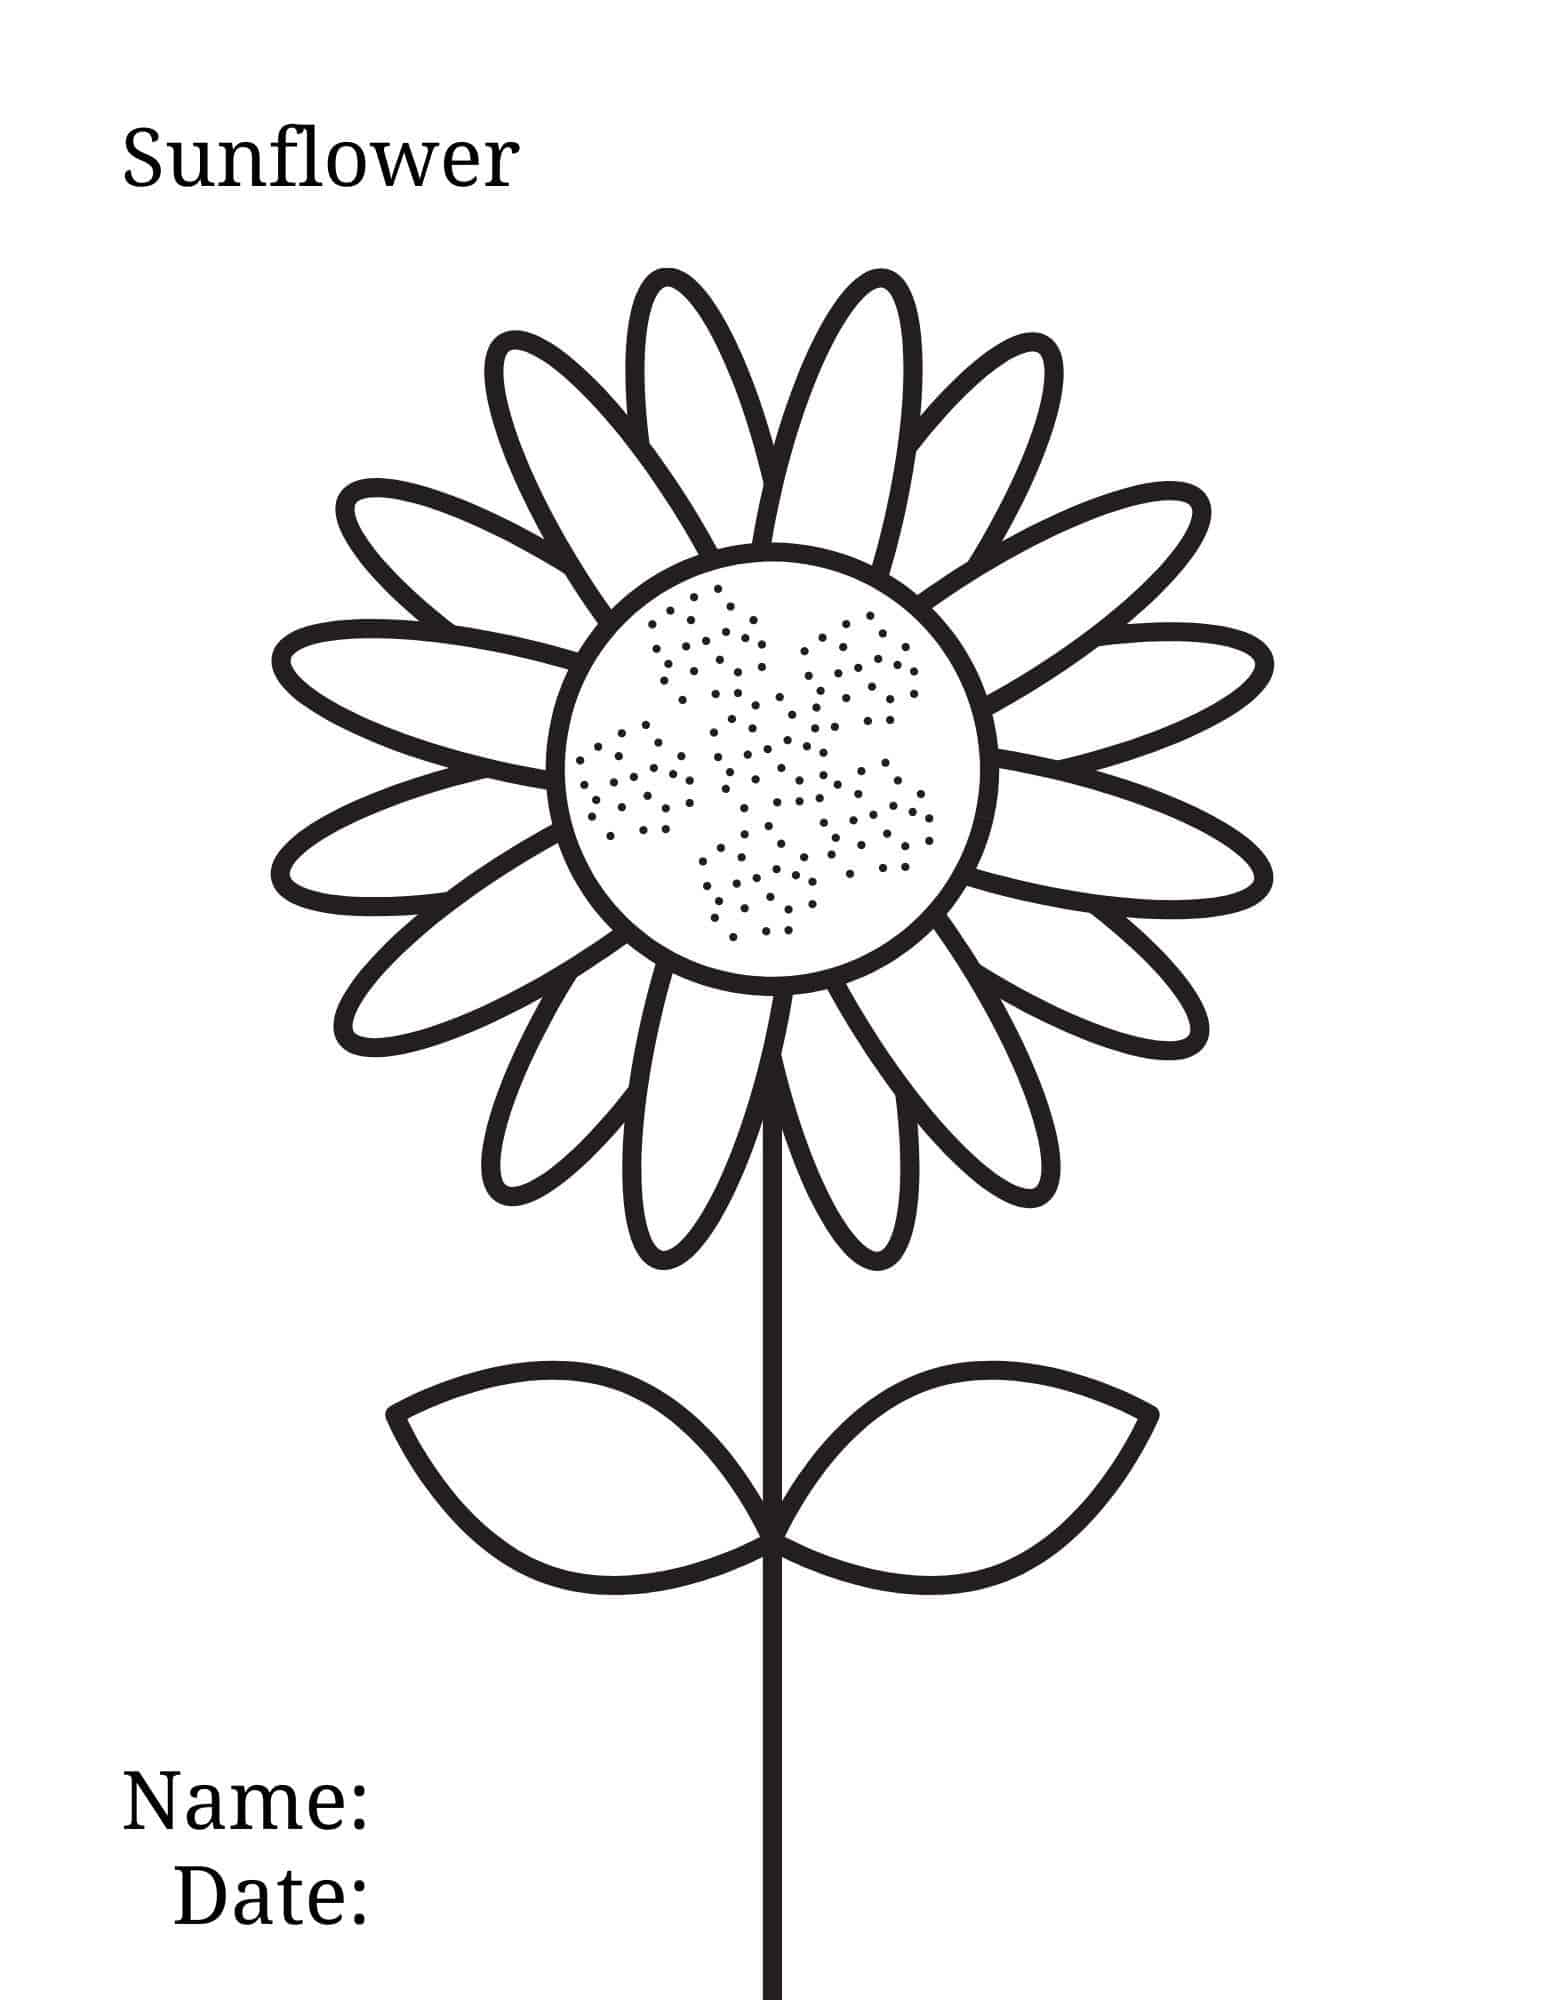 Sunflower coloring page ð ð brighten your day with floral fun